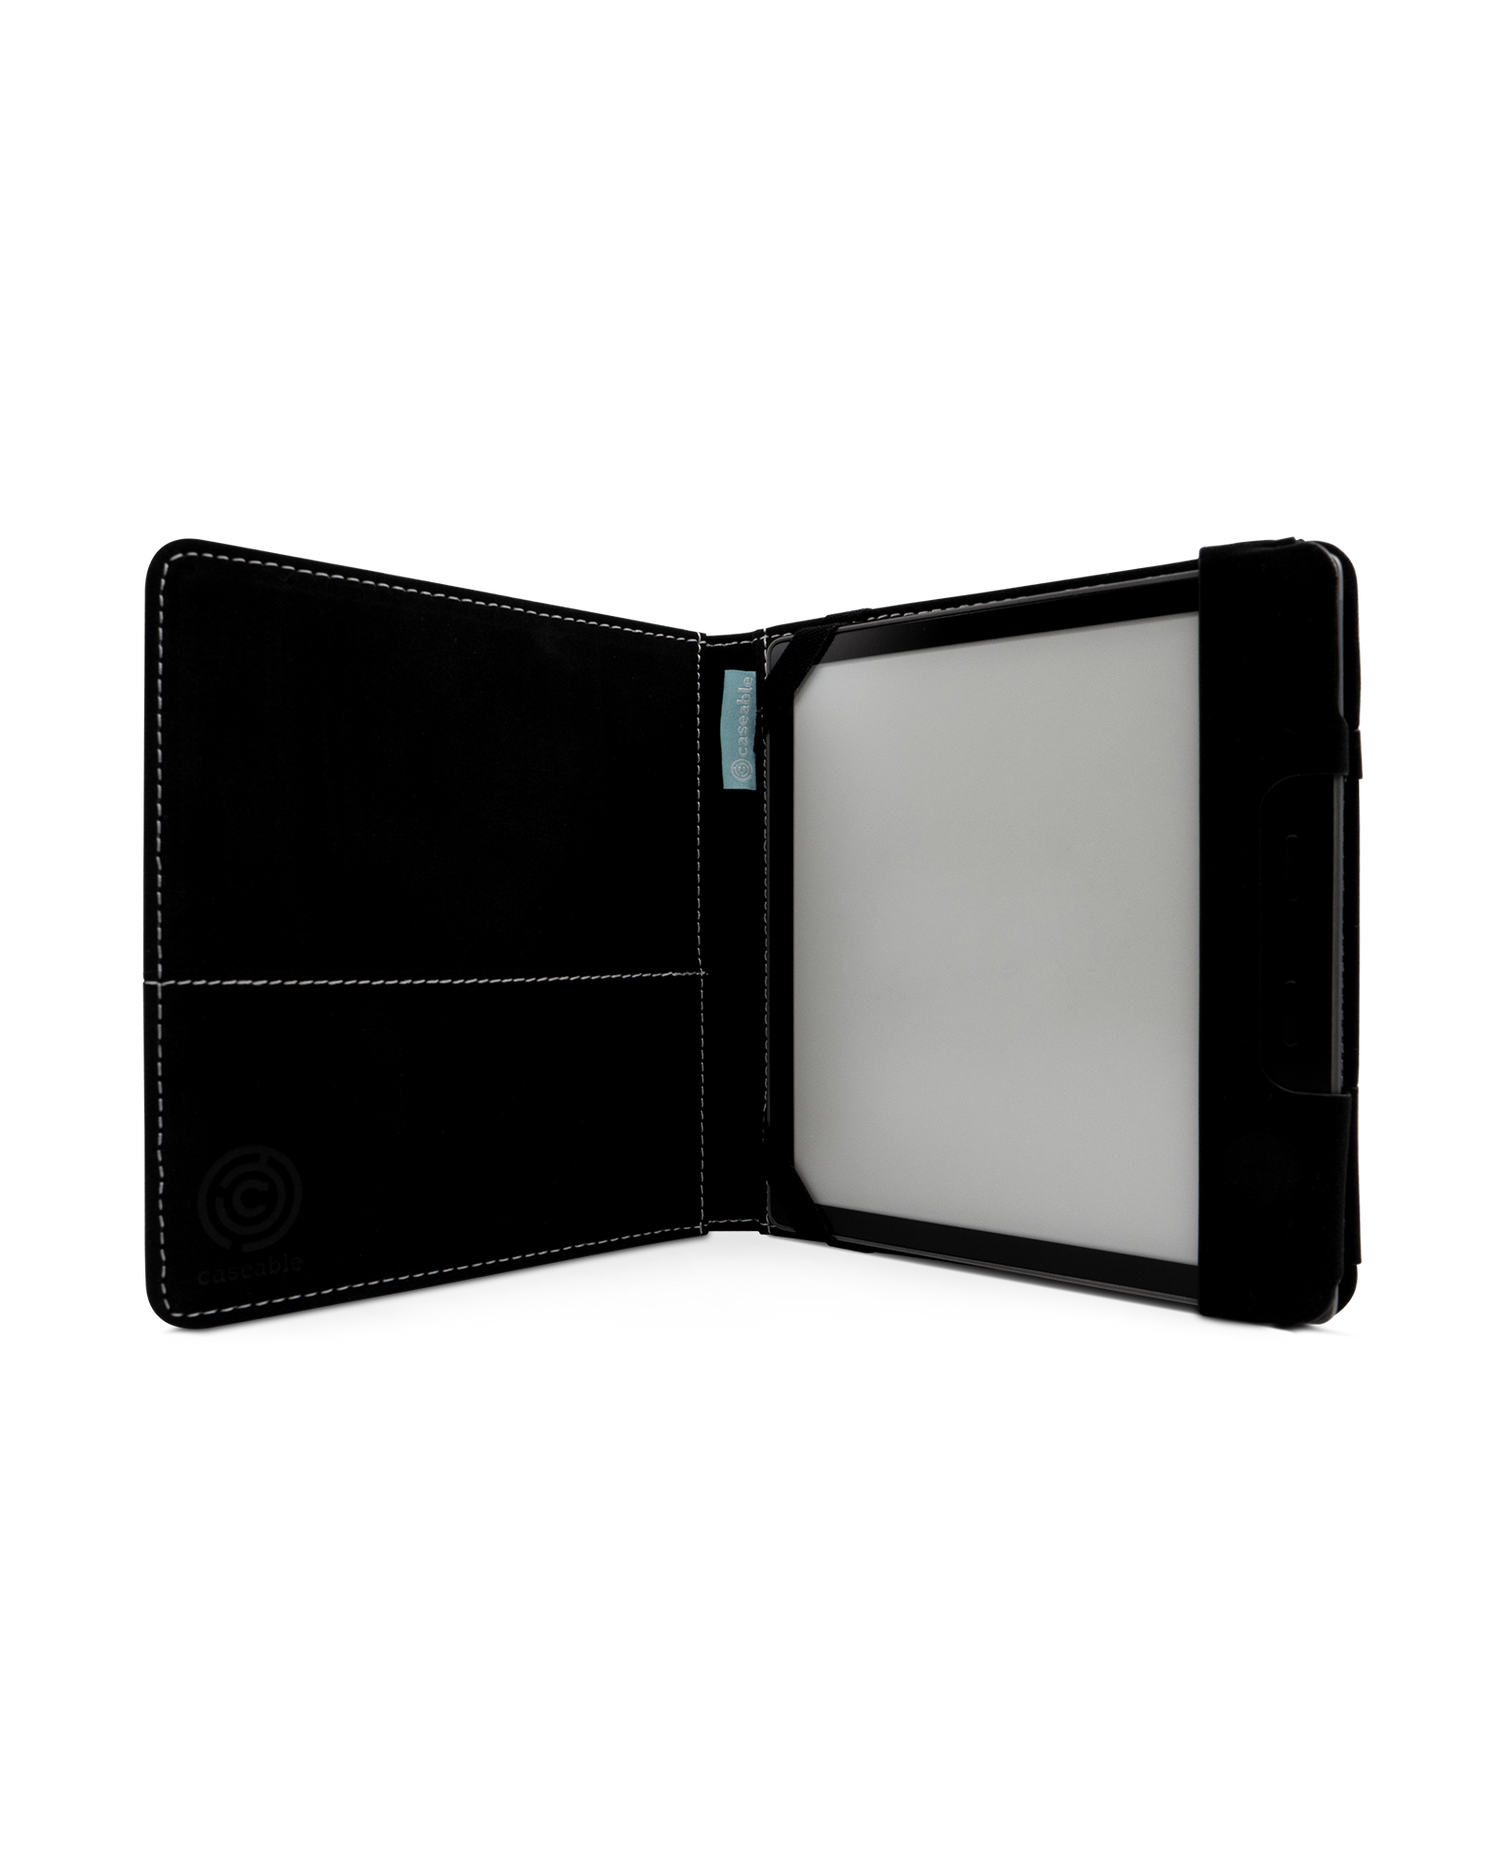 Blue Marble eReader Case for tolino vision 6: Opened interior view